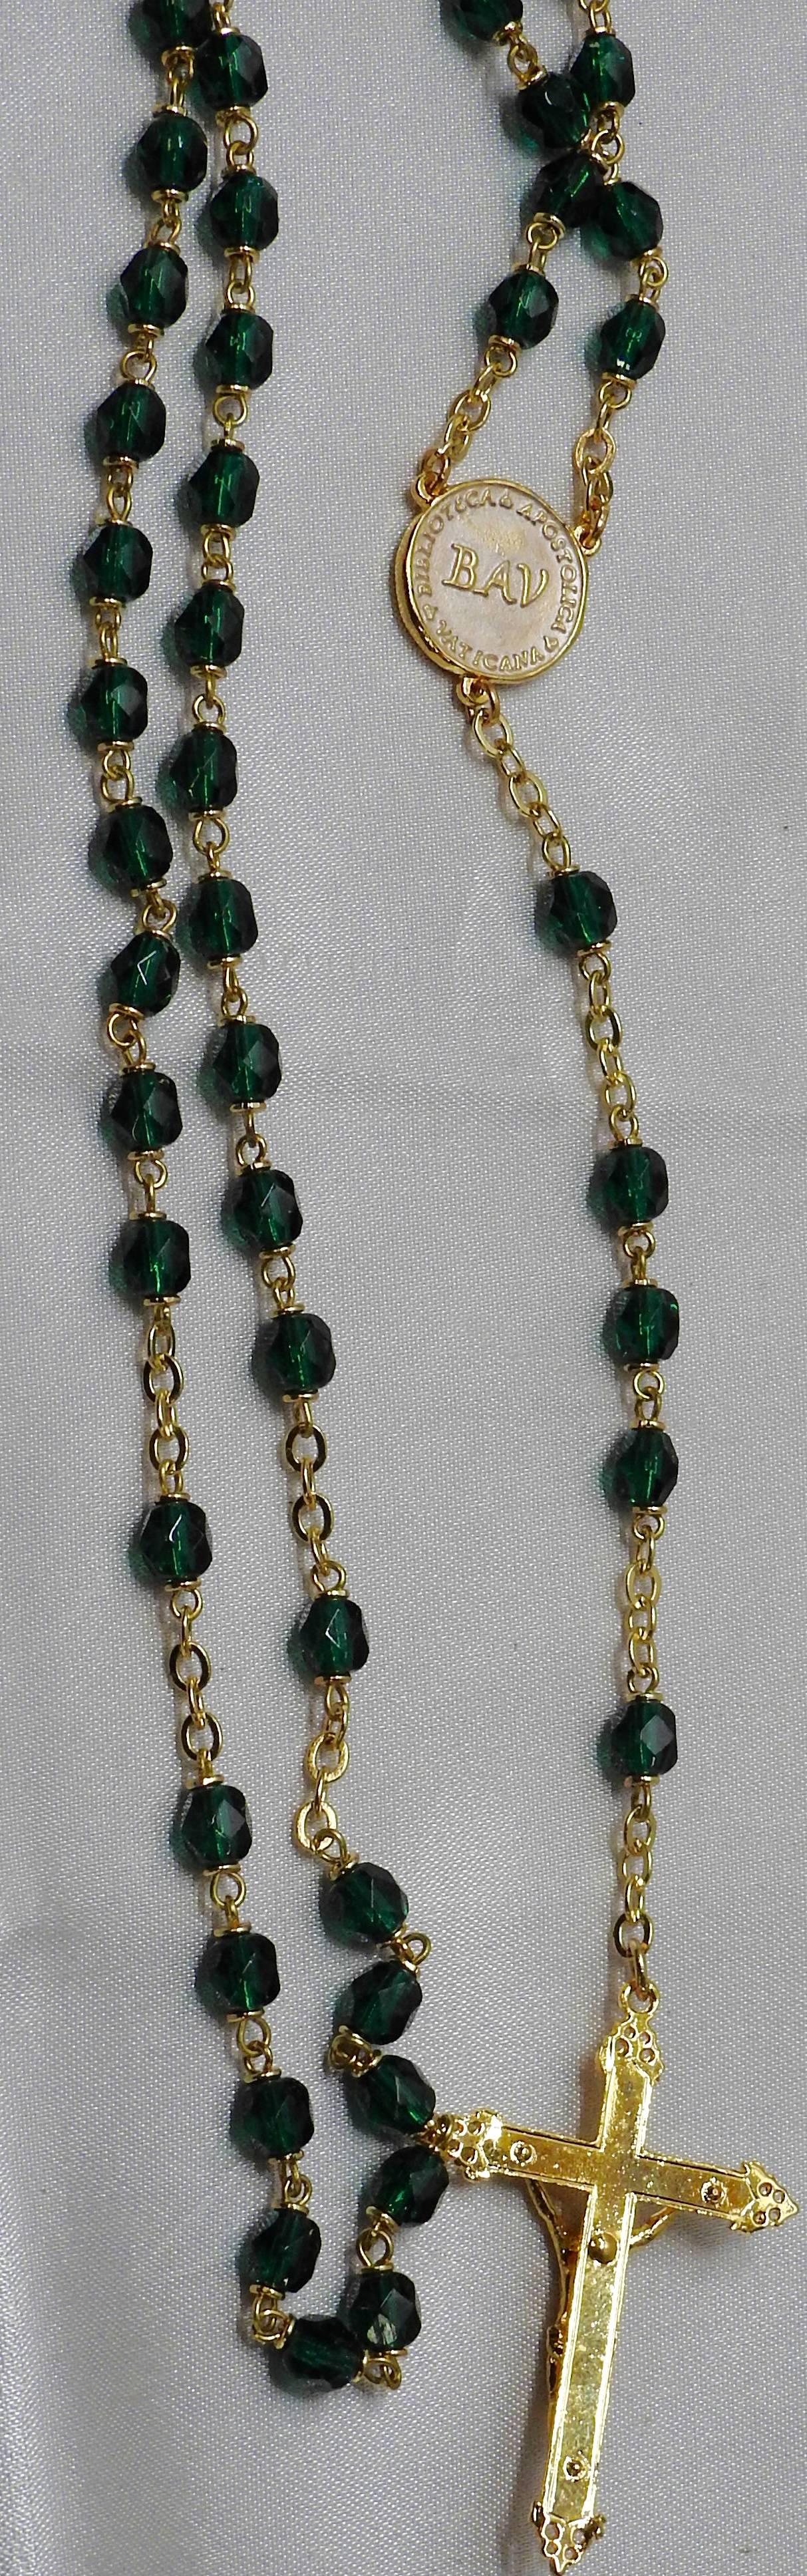 Beaded Rosary from the Vatican Library Collection with Green Czech Beading